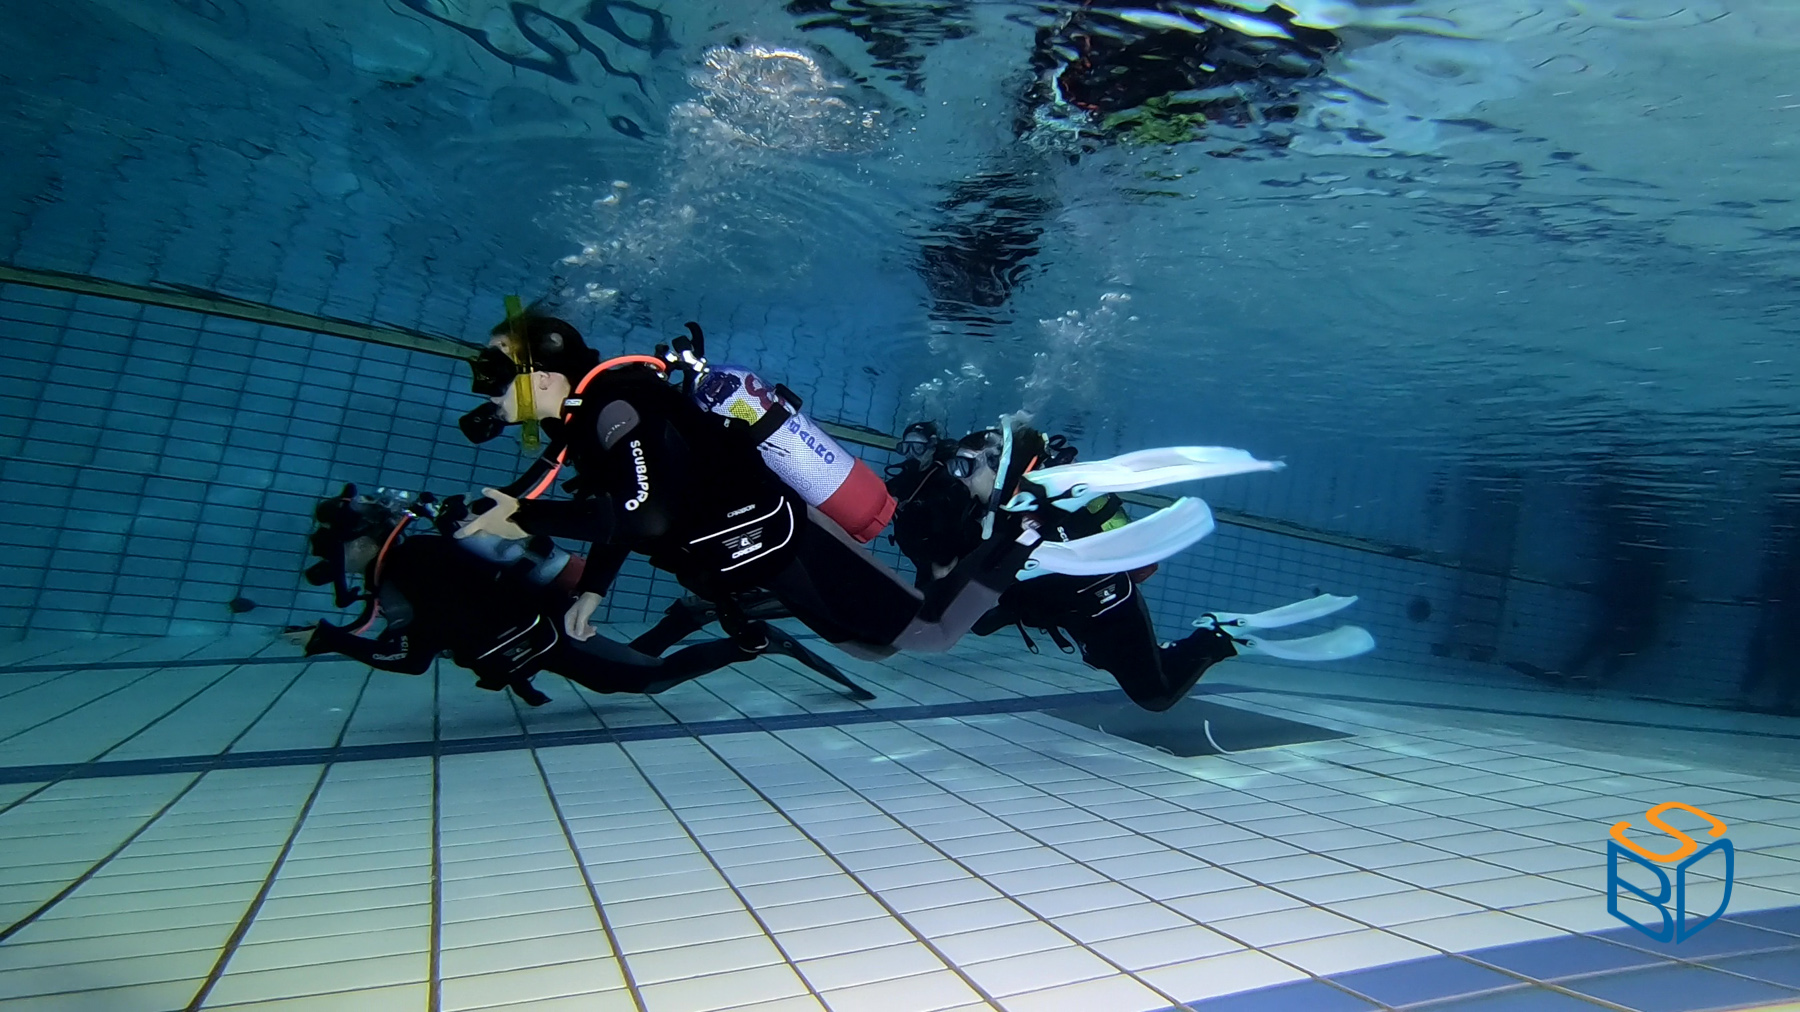 SSI Open Water Diver Kurs